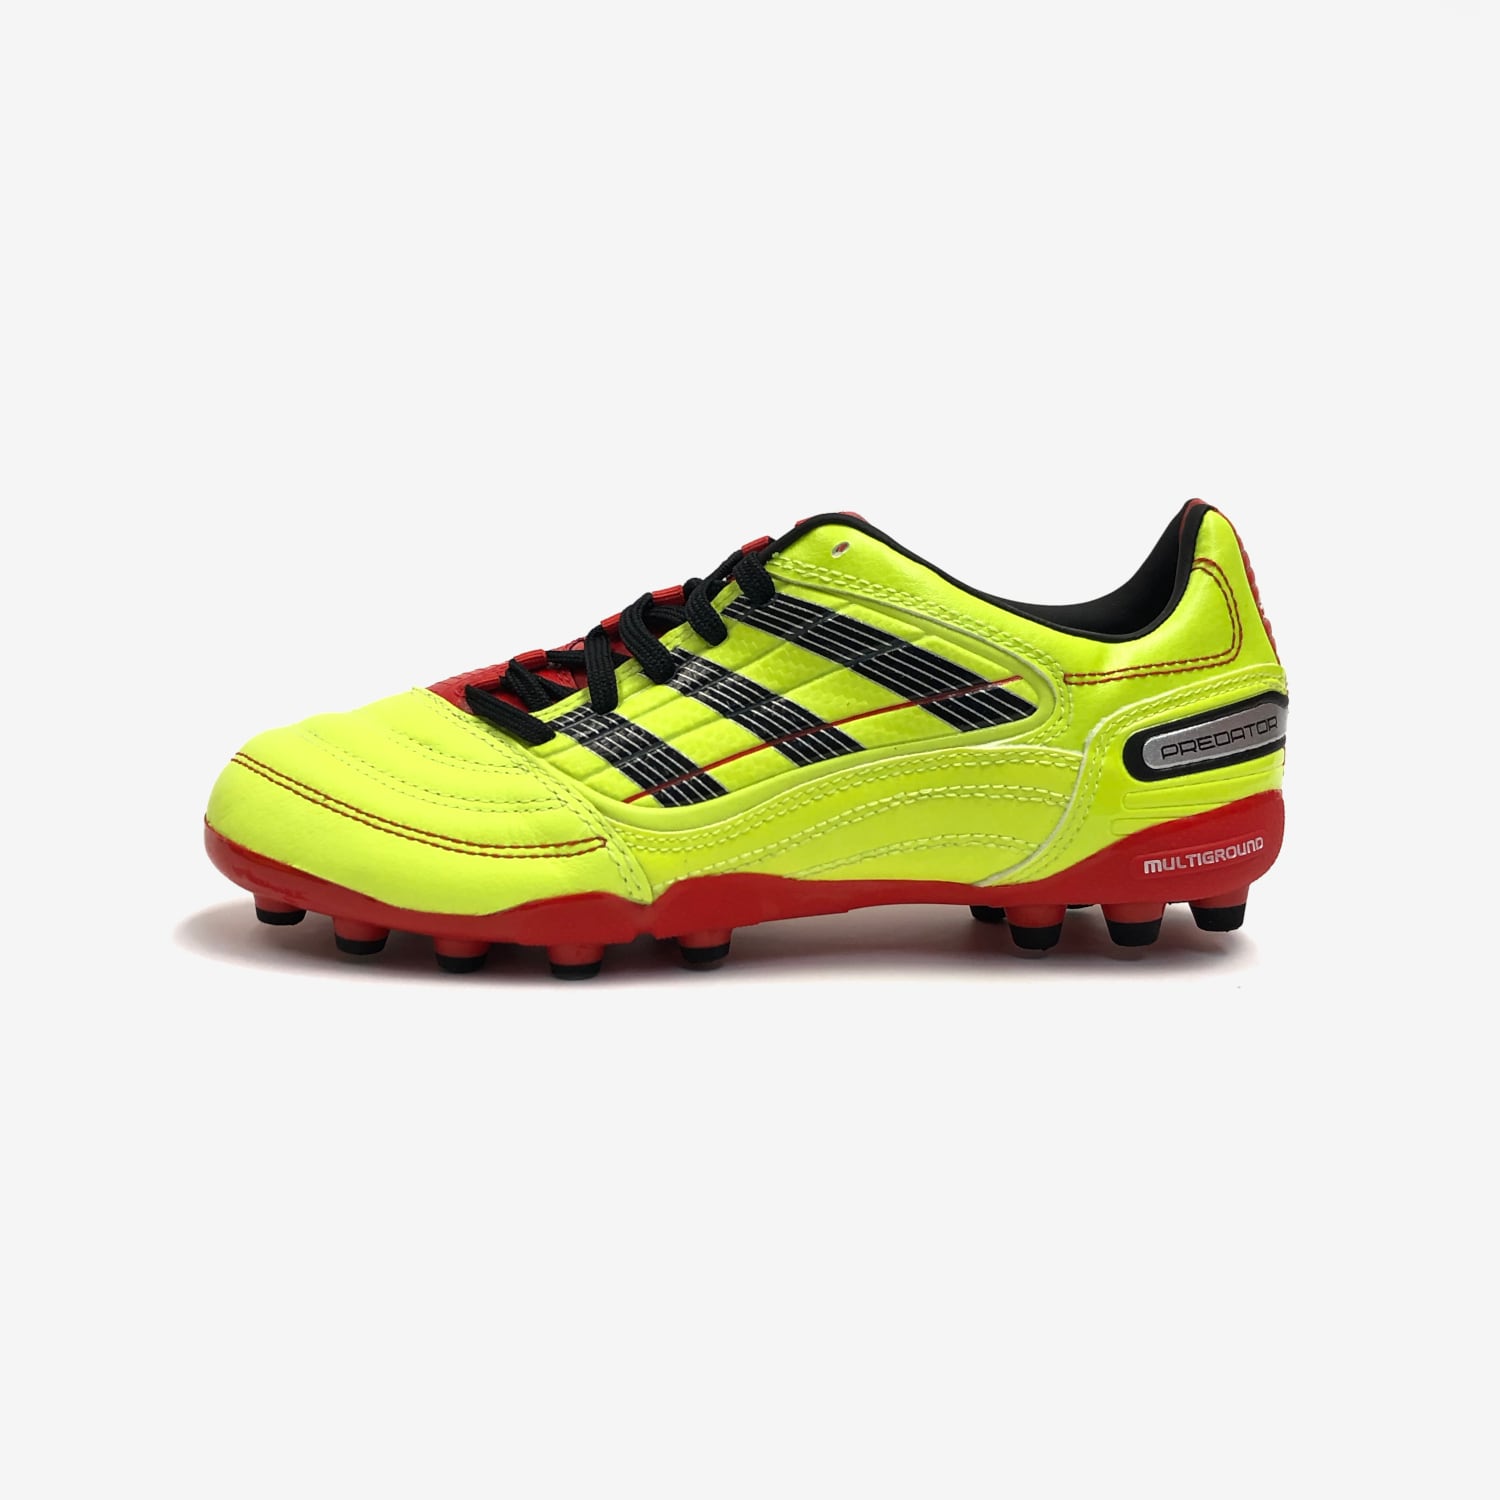 adidas multi ground soccer cleats